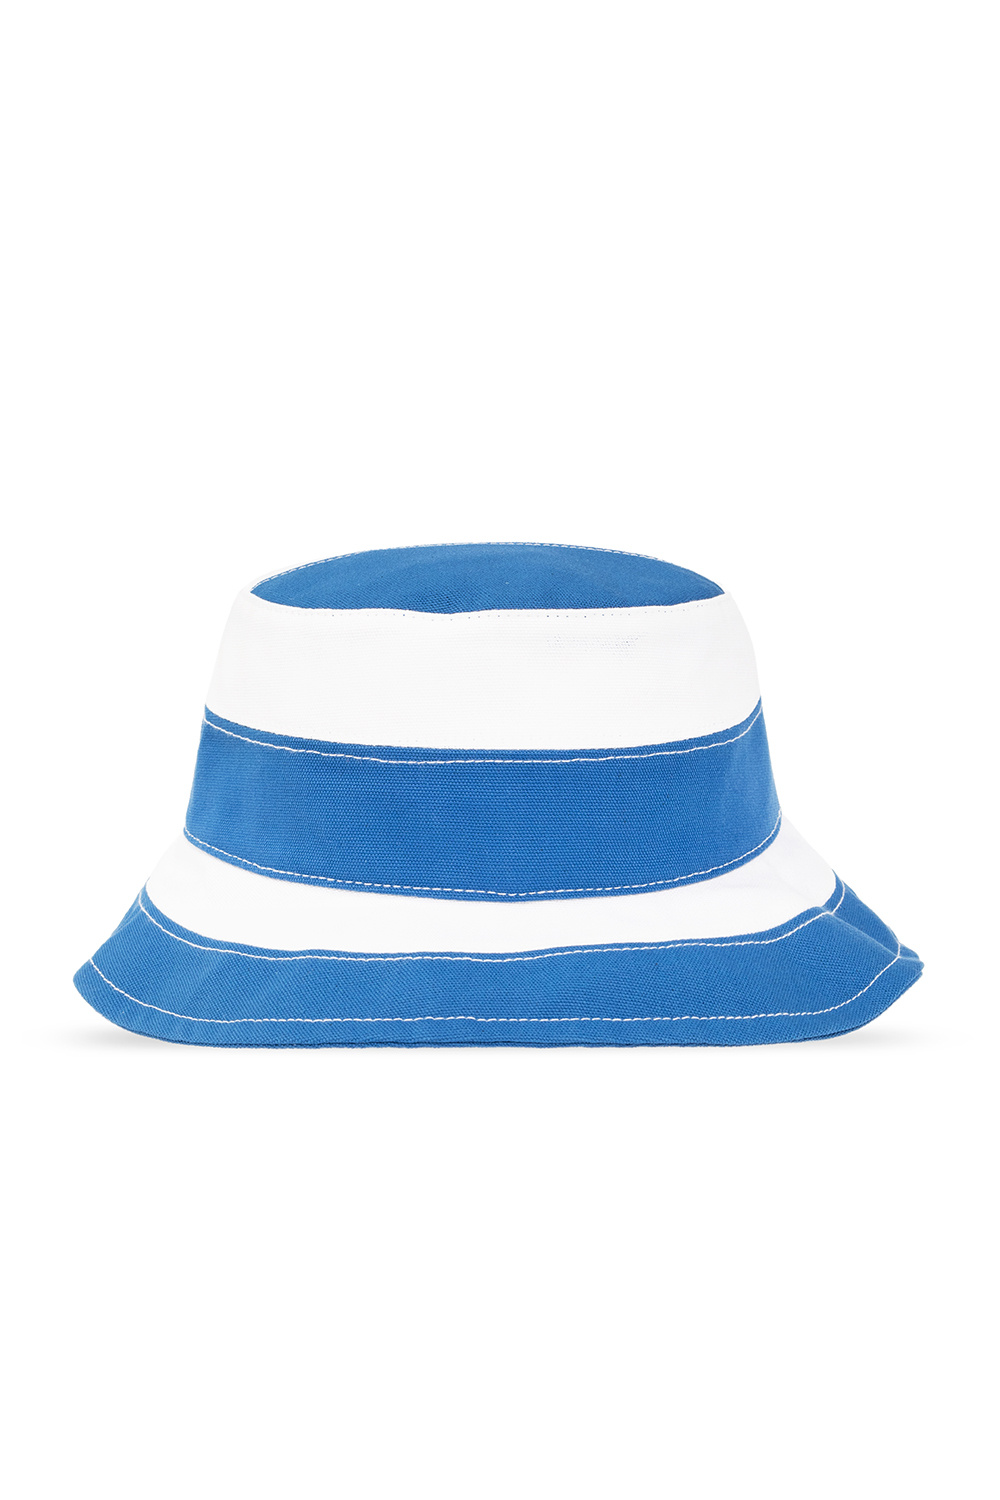 Jacquemus ‘Rayures’ striped bucket hat